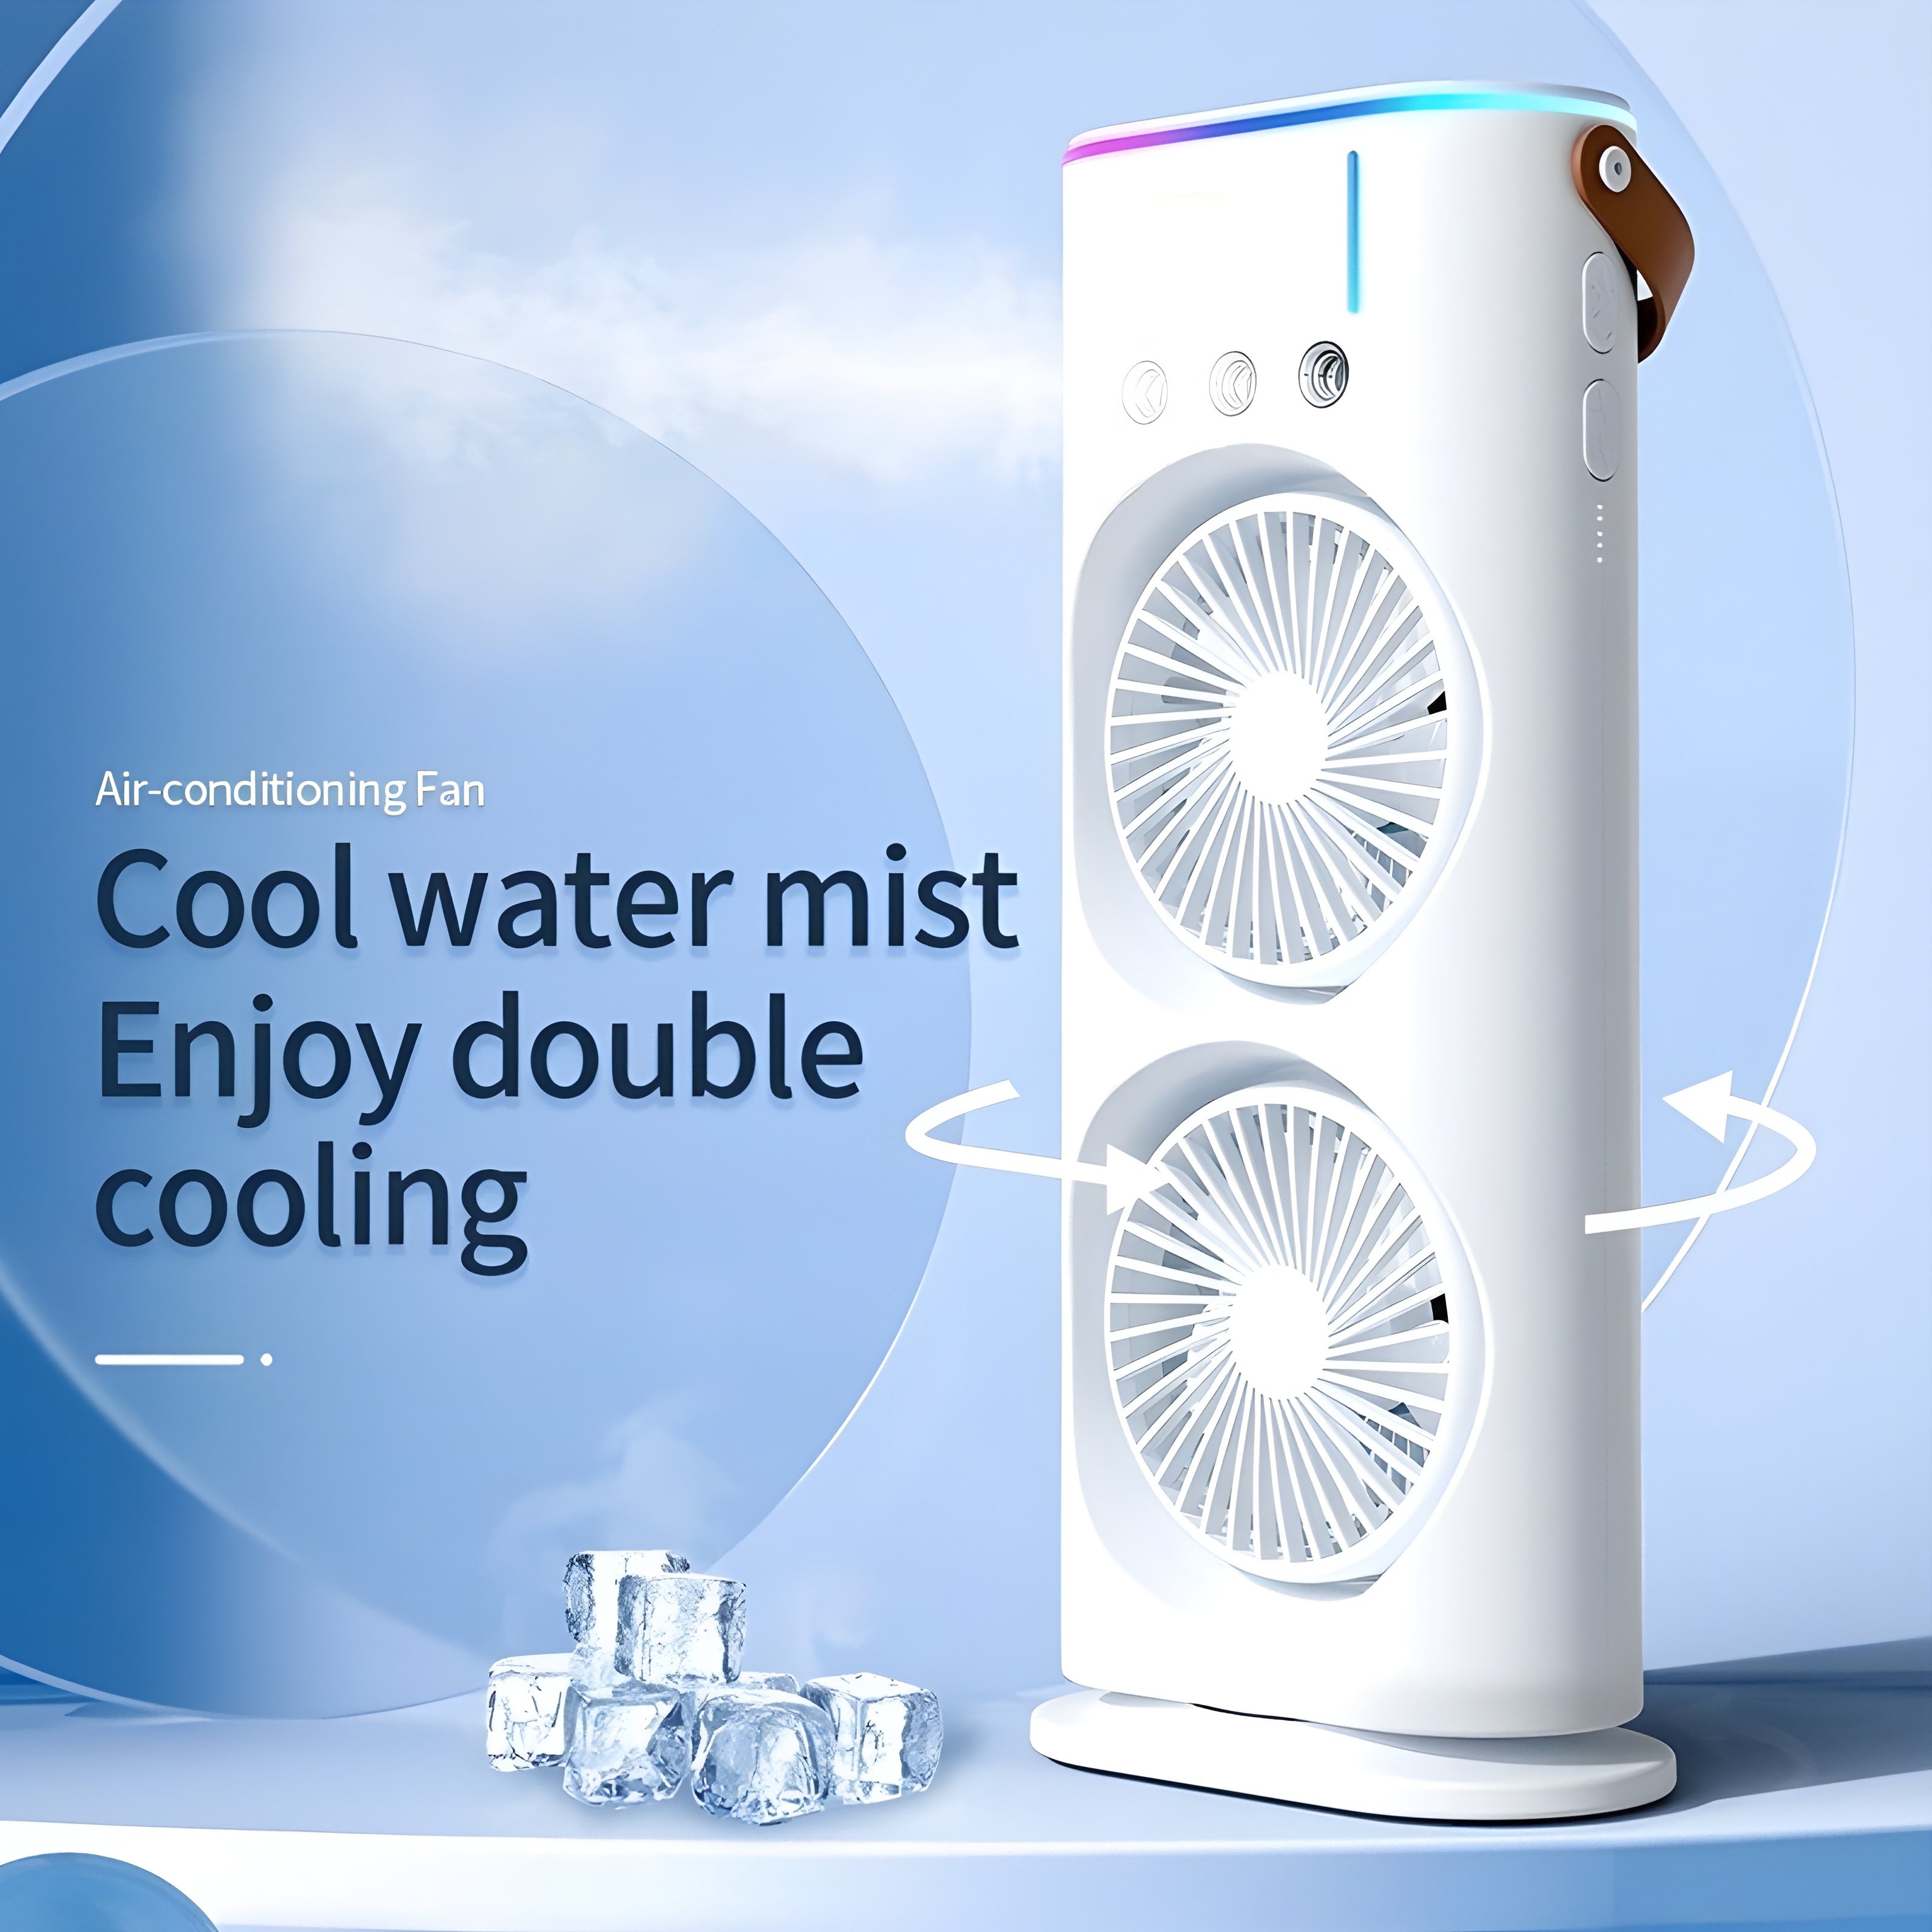 

Portable Mini Air Cooler With Mist Humidifier - Usb Rechargeable, Dual-layer Design For Home & Office Use, Long Battery Life